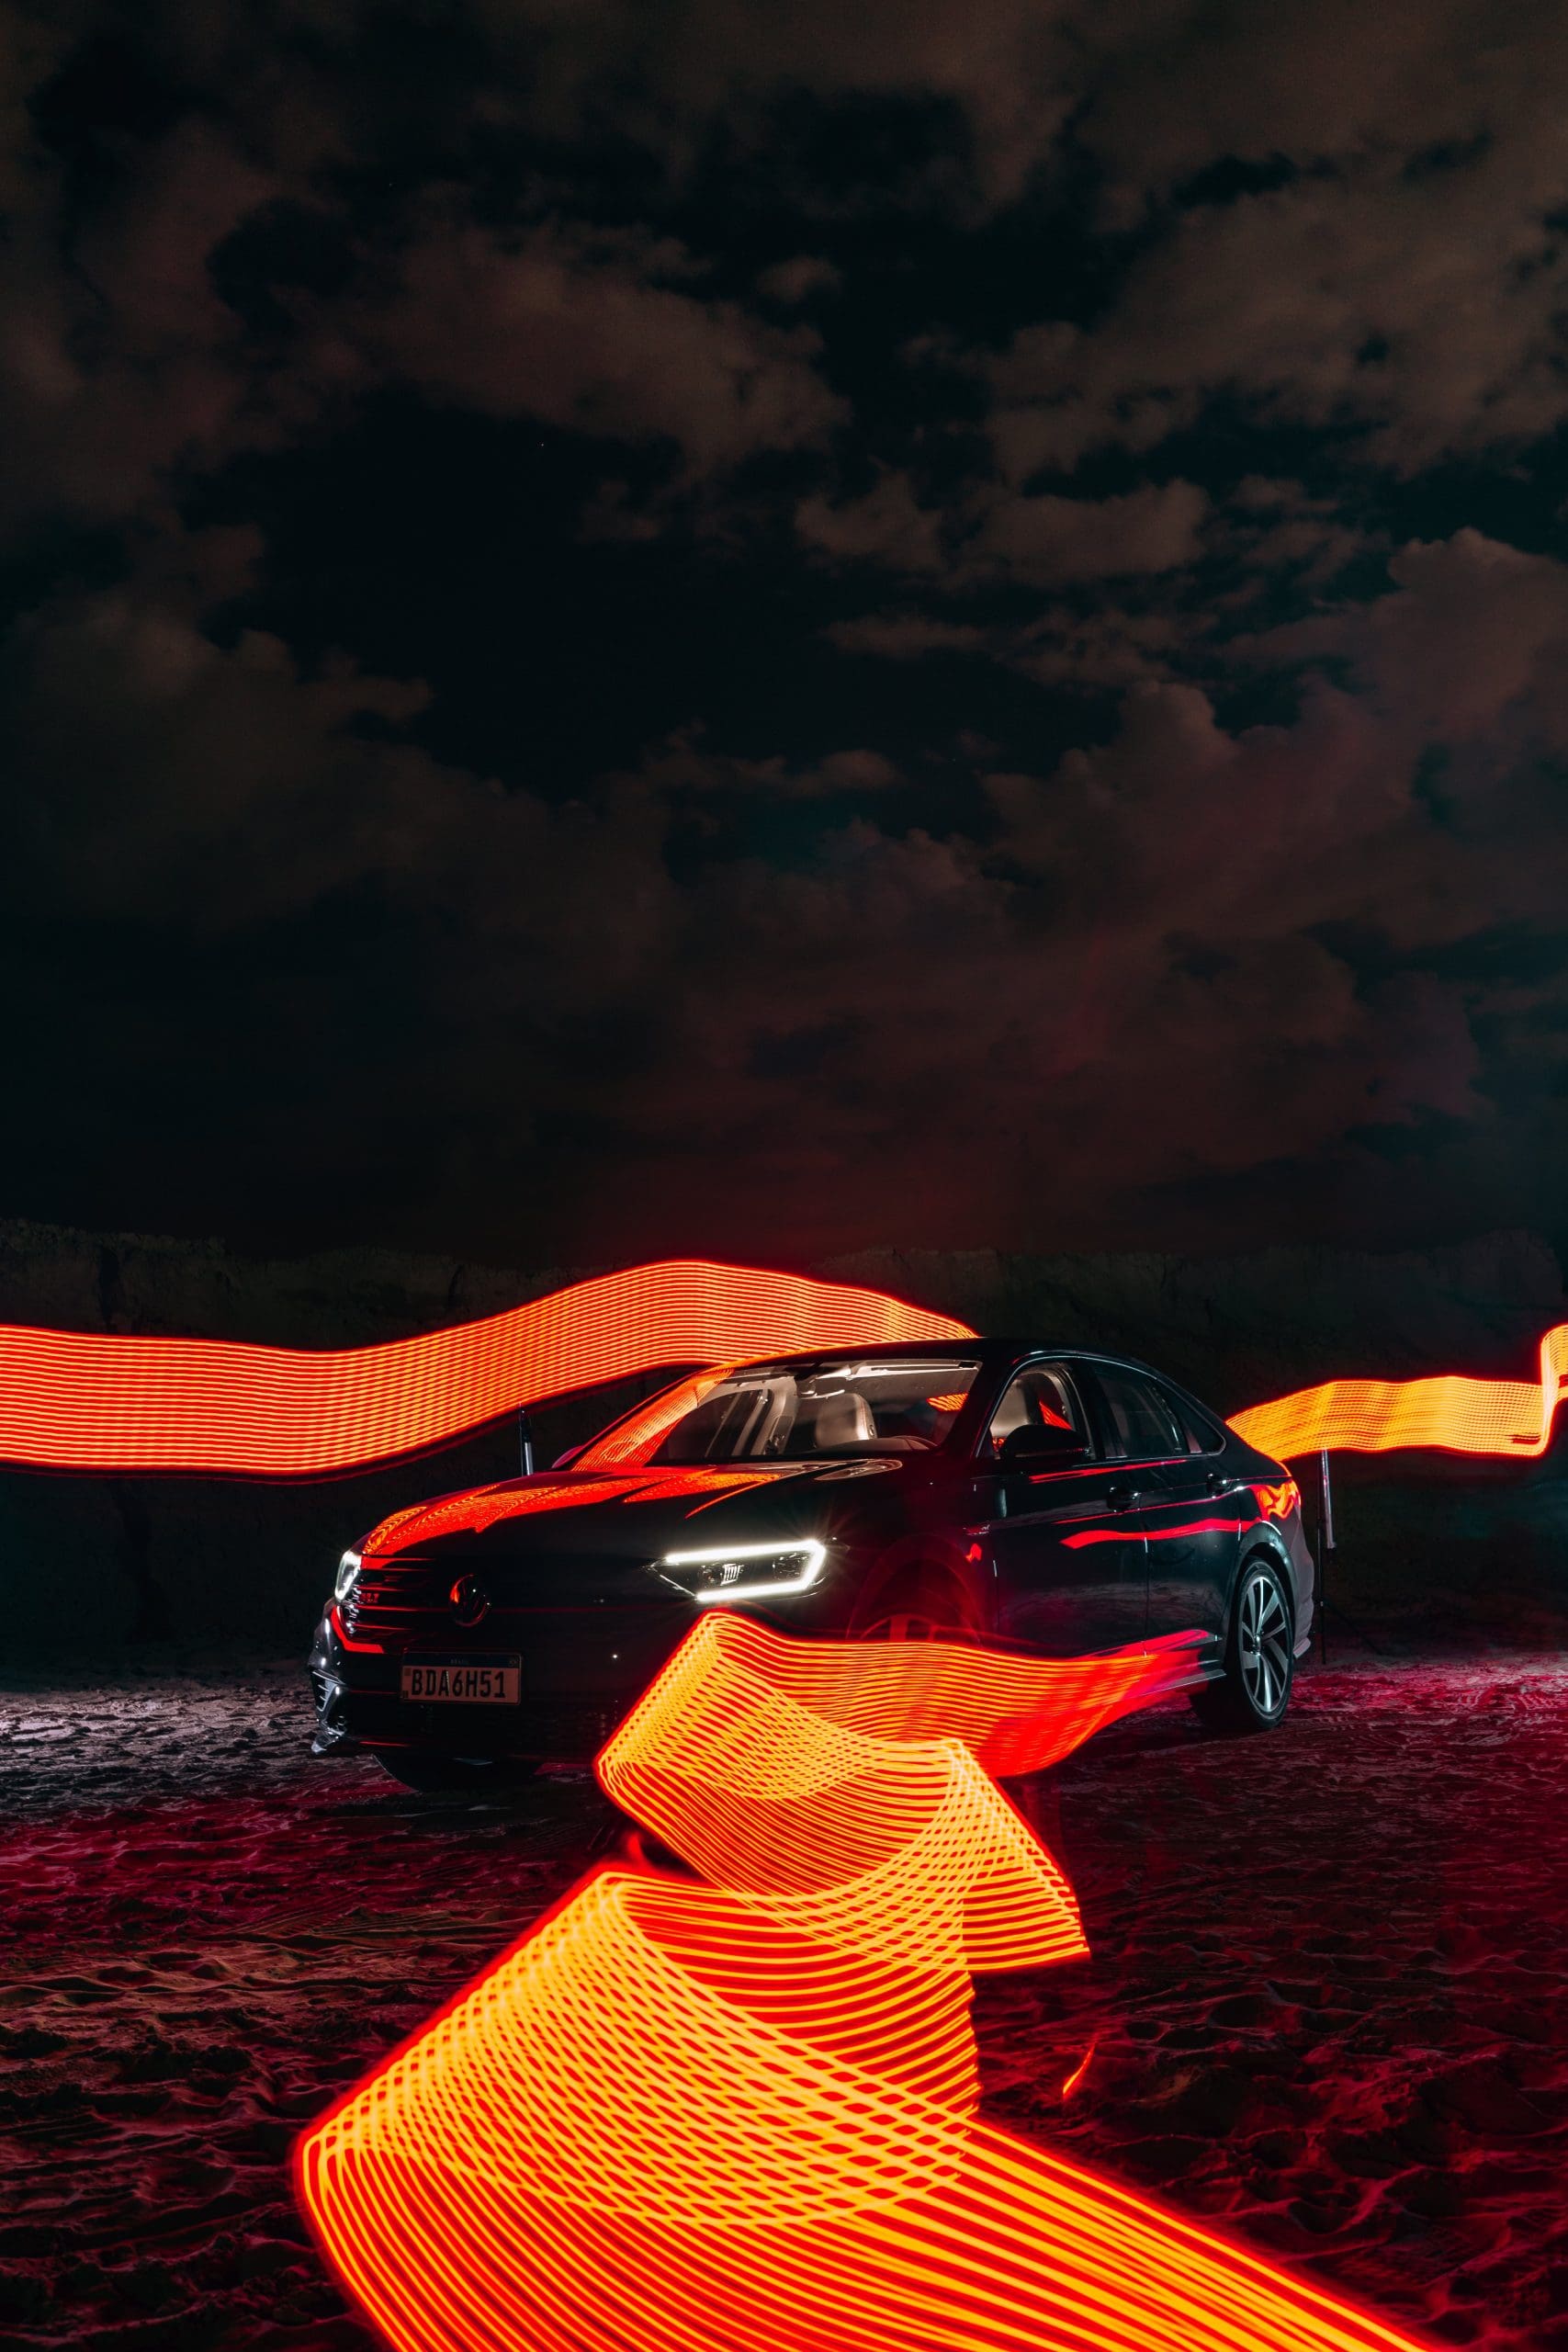 A car is lit up with red and orange lights.